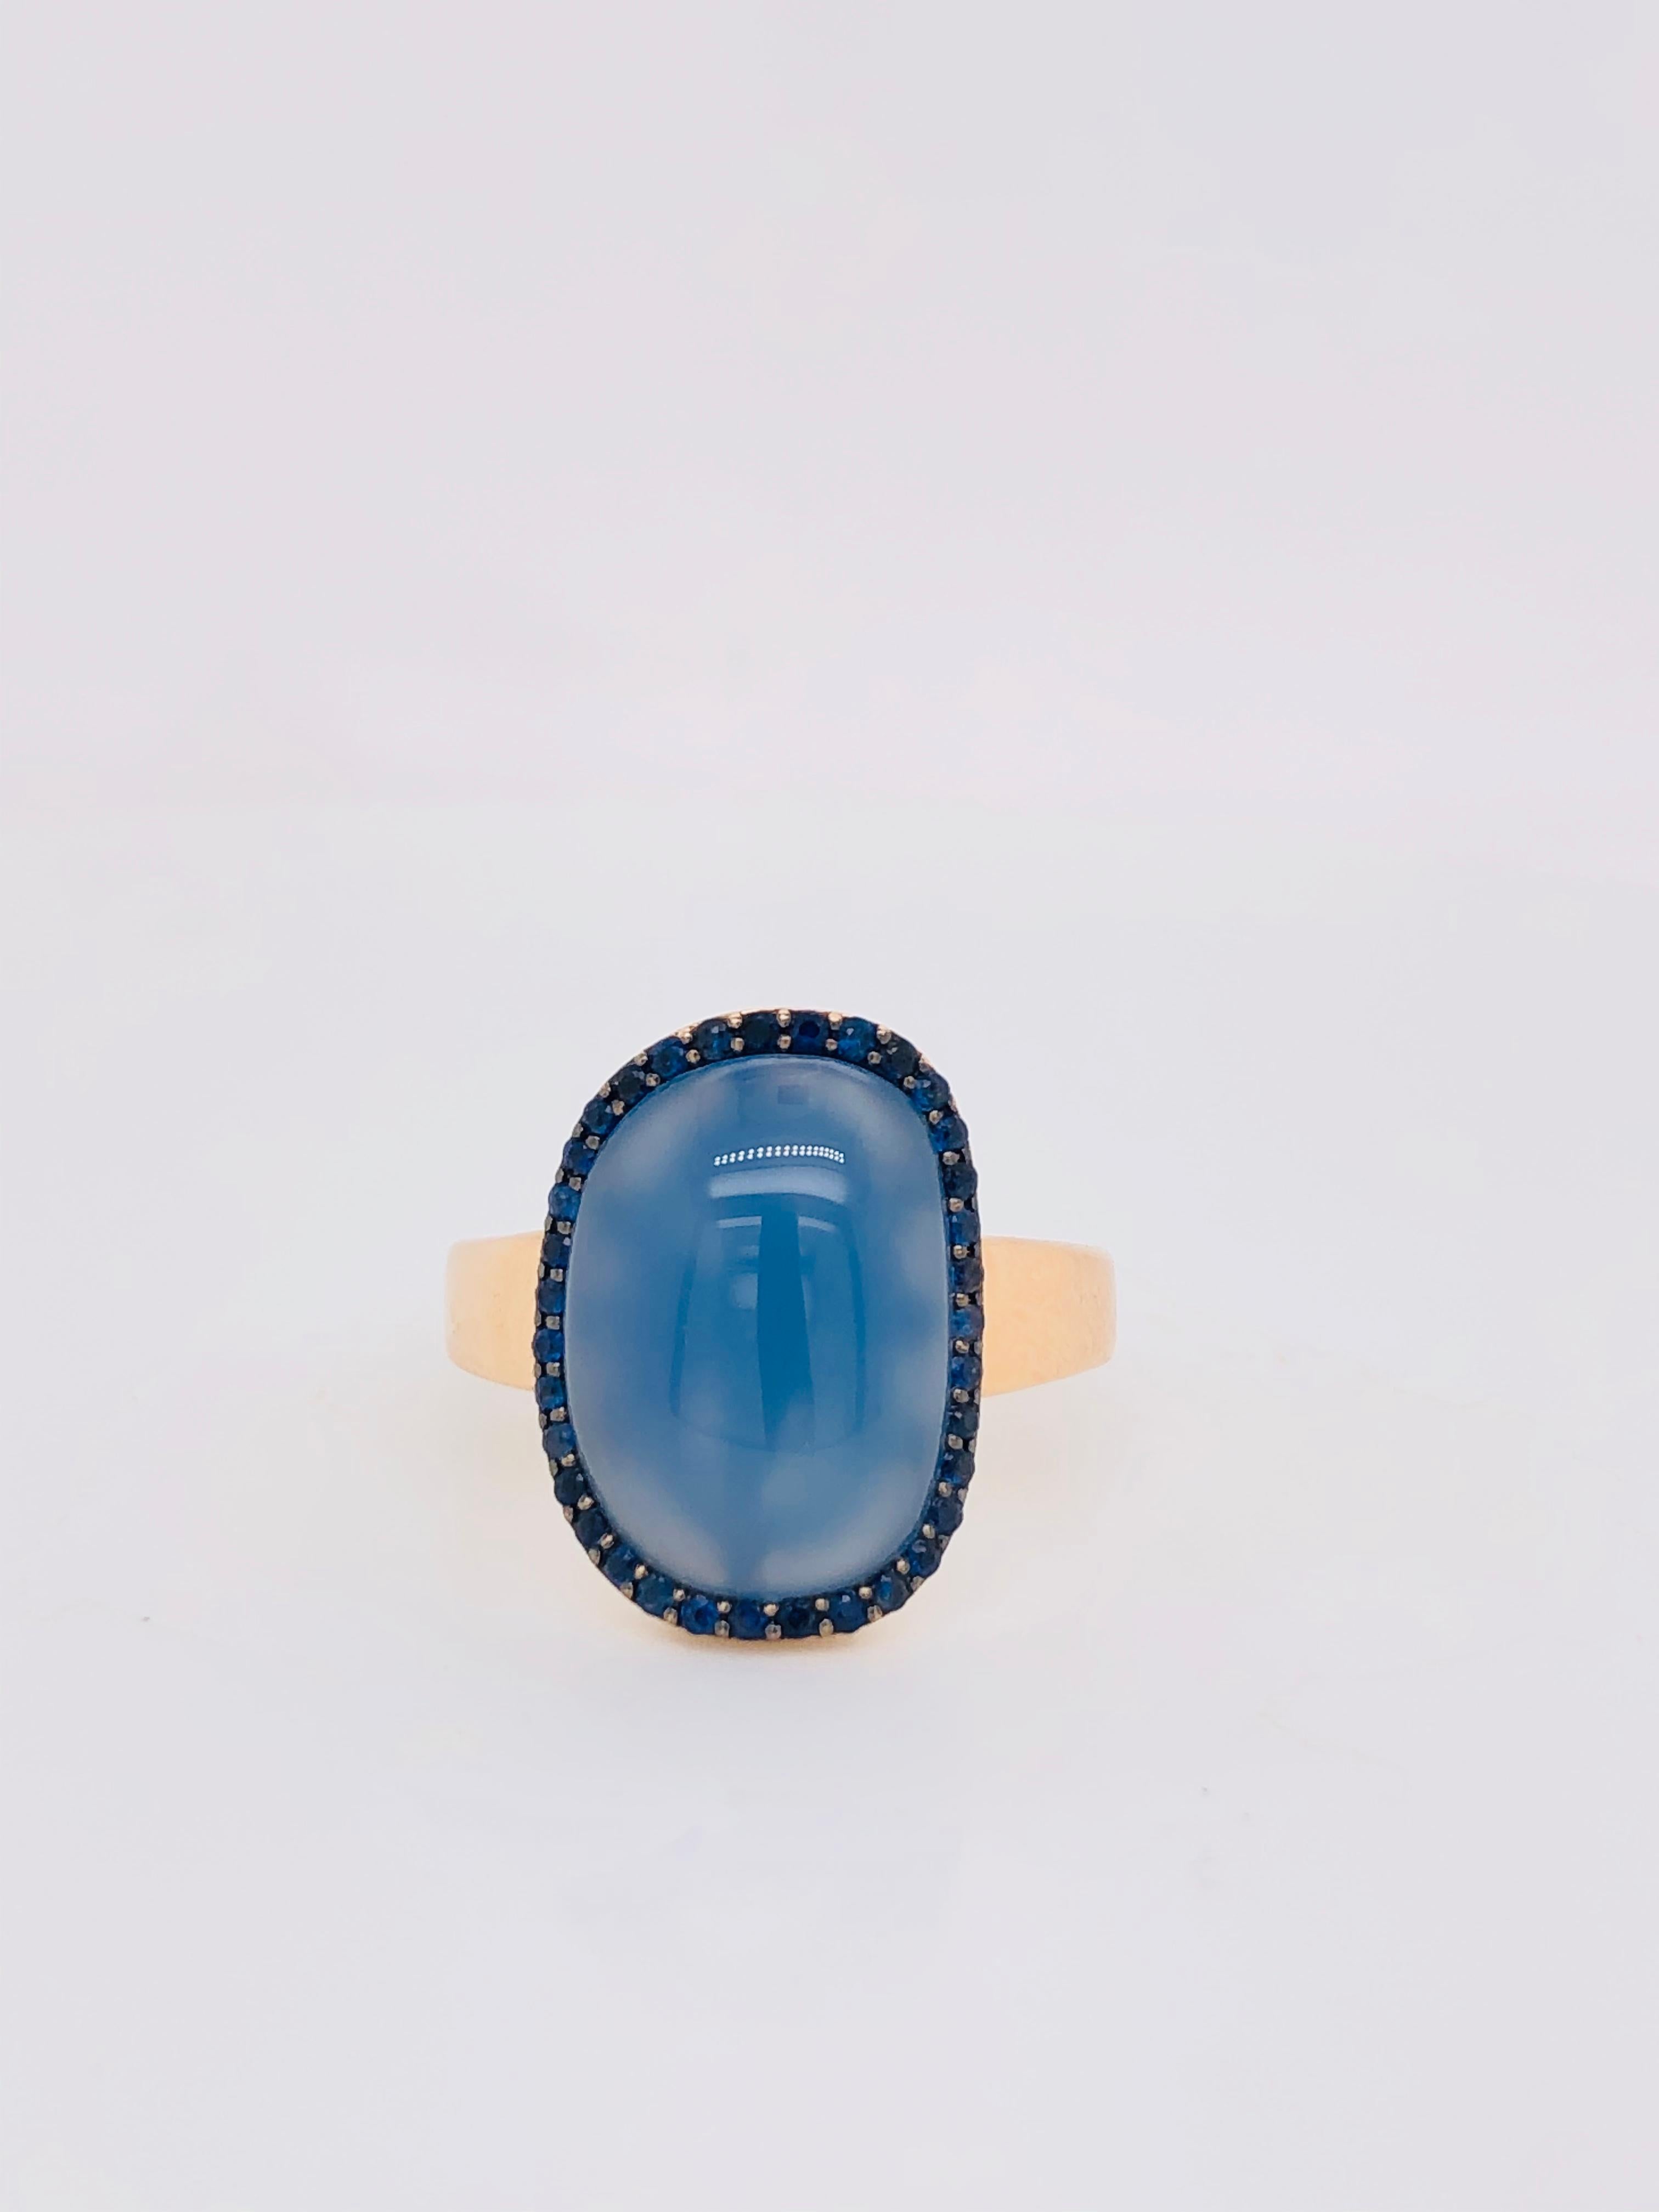 Discover this magnificent 18-carat rose gold ring, carefully crafted to bring timeless elegance to your jewellery collection. This exquisite ring has a unique design featuring a stunning cabochon of blue agate, surrounded by a sparkling halo of